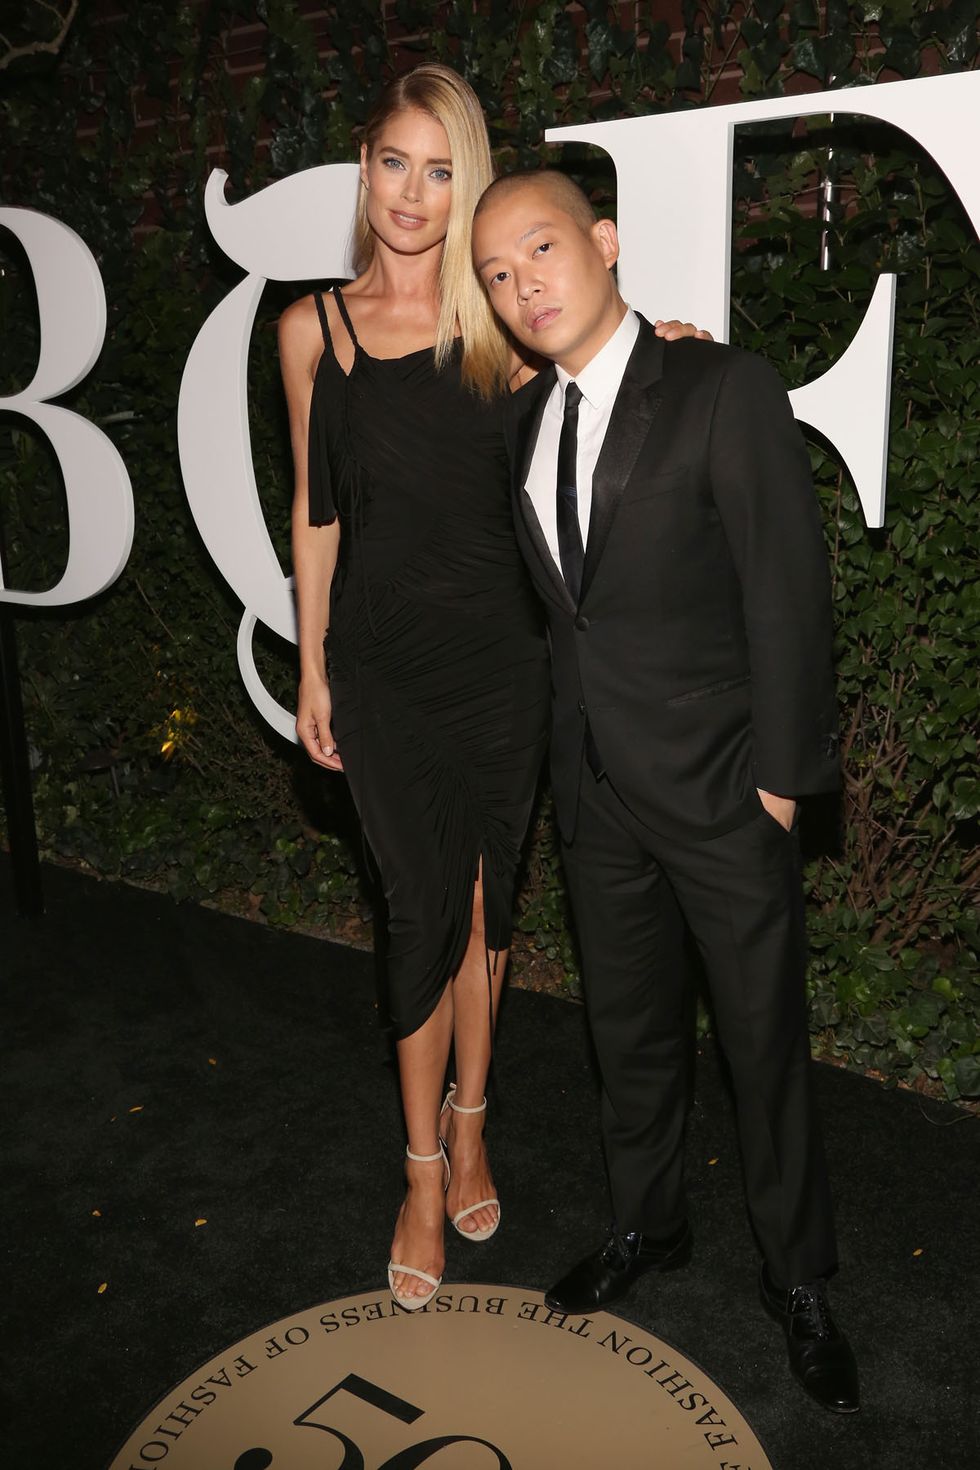 NEW YORK, NY - SEPTEMBER 09:  Doutzen Kroes and Jason Wu attend 2017 BoF 500 Gala at Public Hotel on September 9, 2017 in New York City.  (Photo by Sylvain Gaboury/Patrick McMullan via Getty Images)